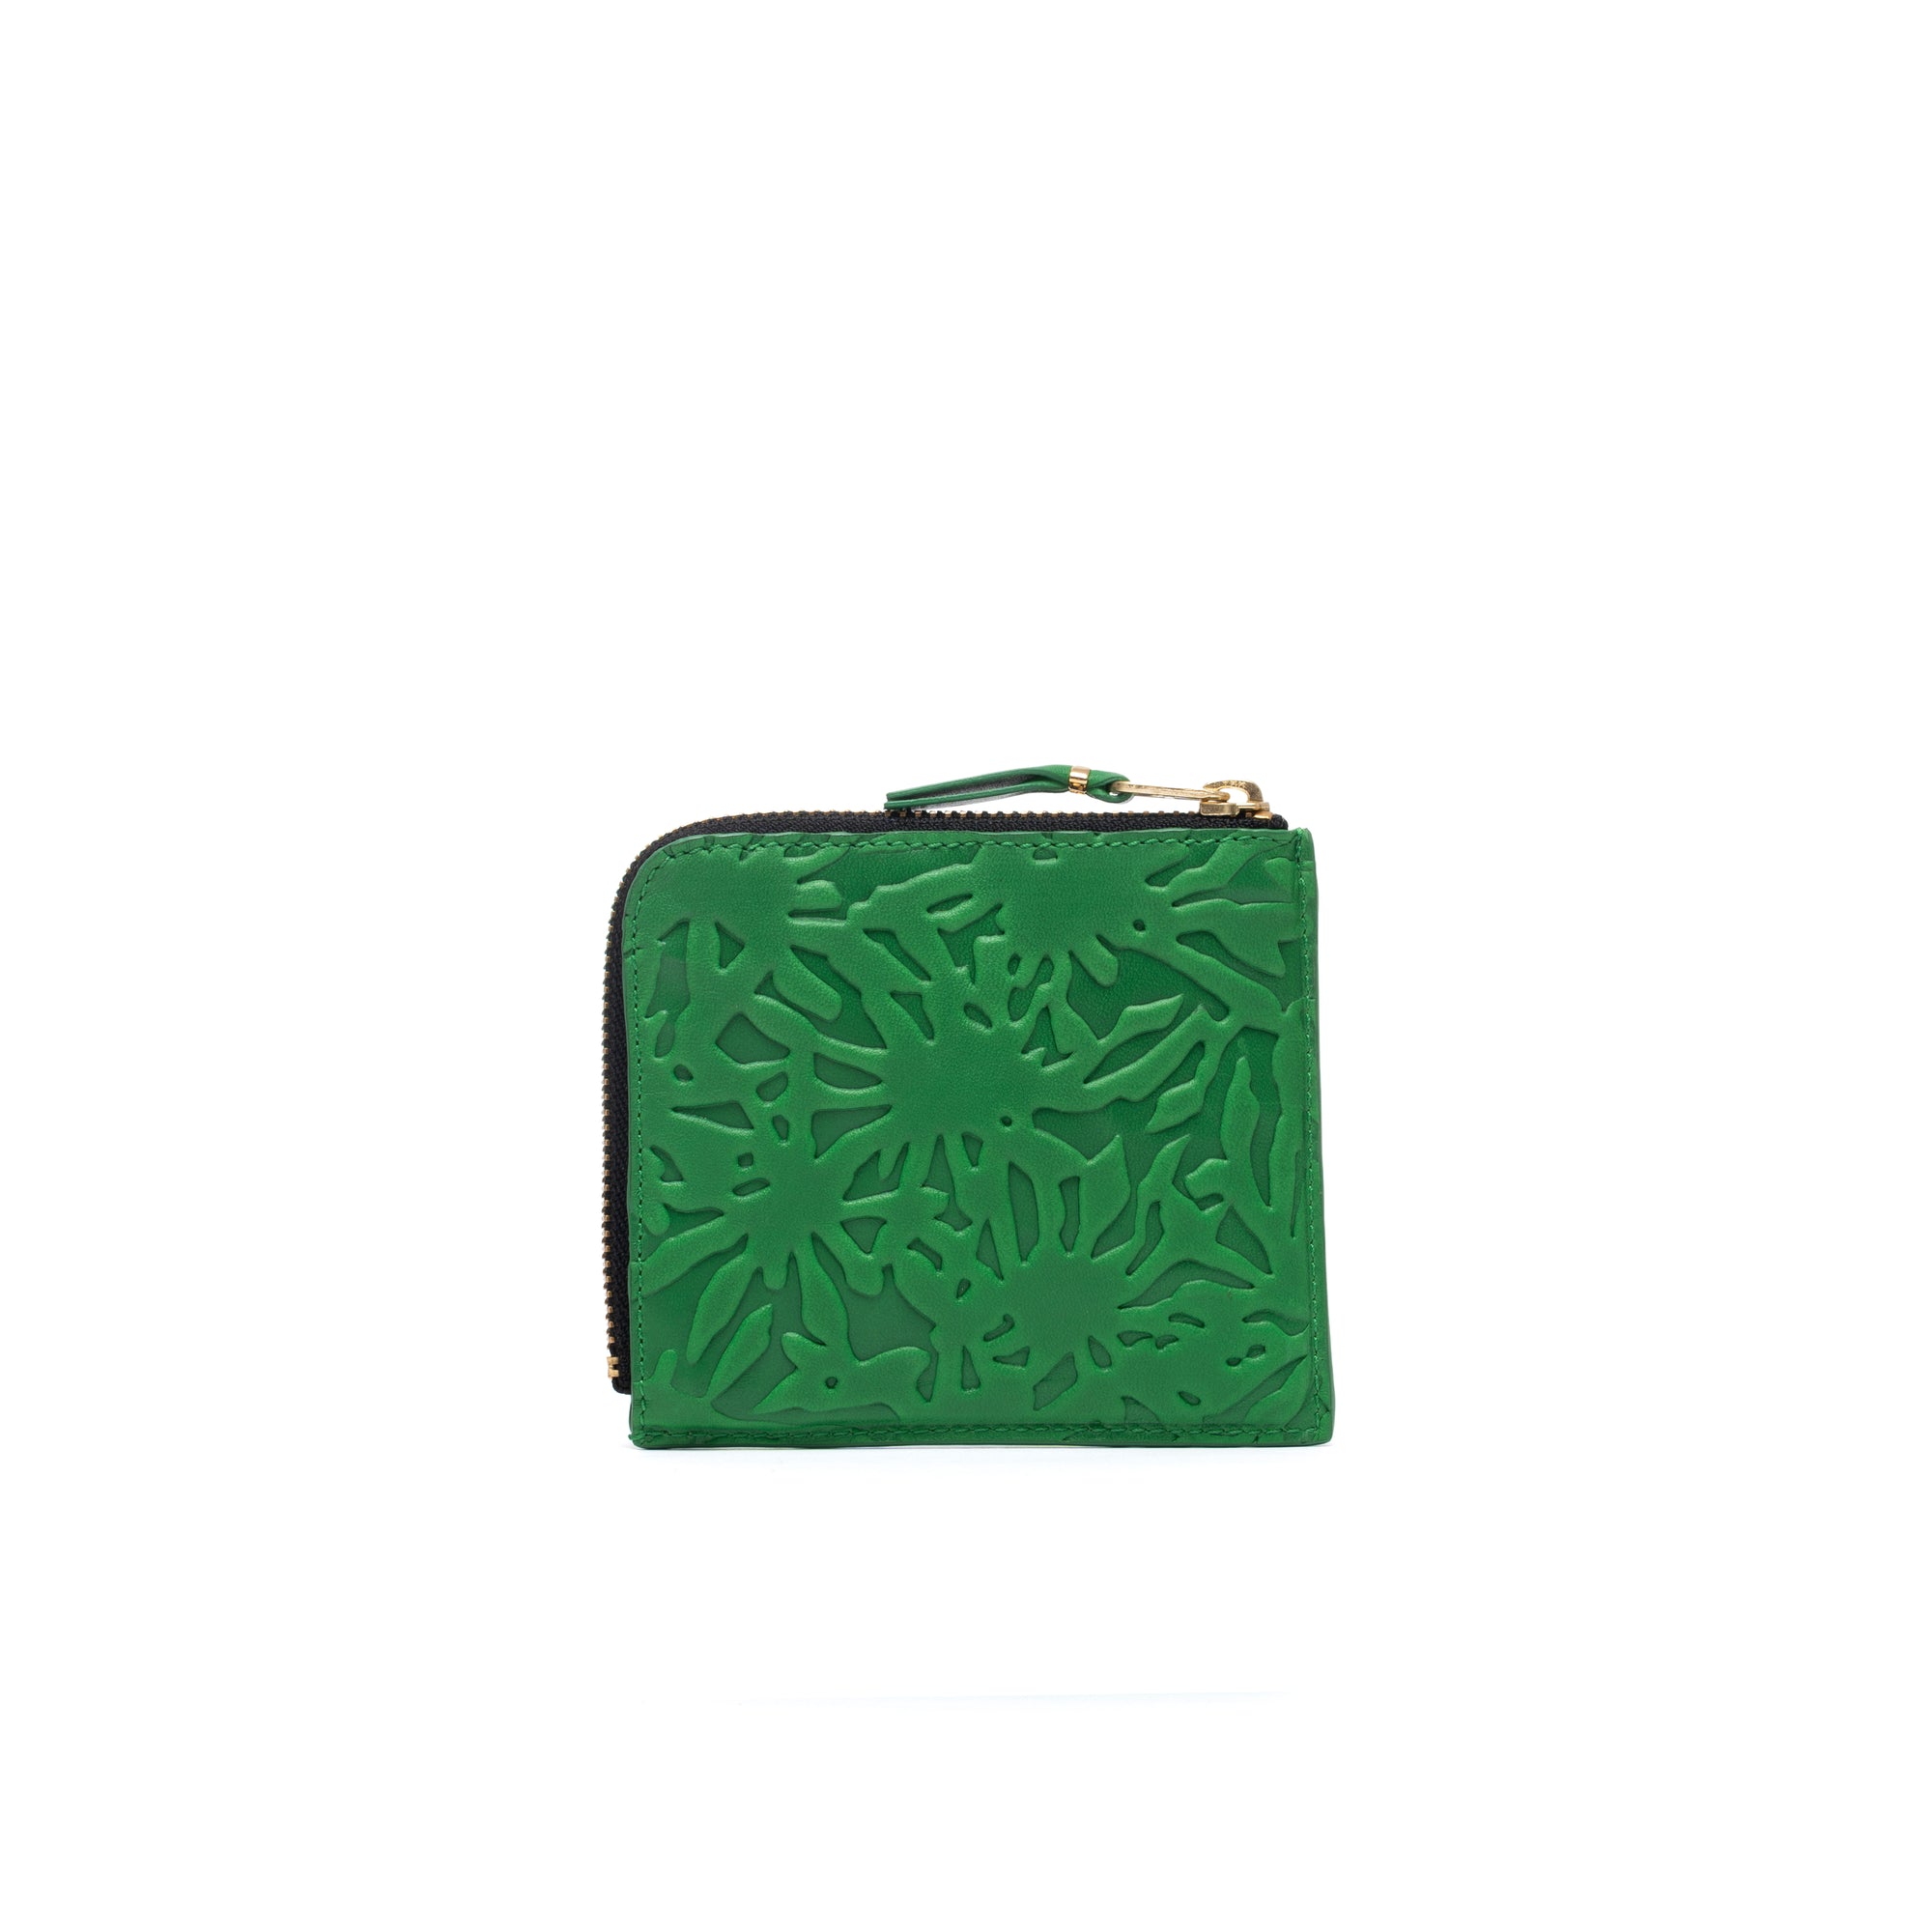 CDG WALLET - Embossed Forest - (SA3100EF Green) view 2